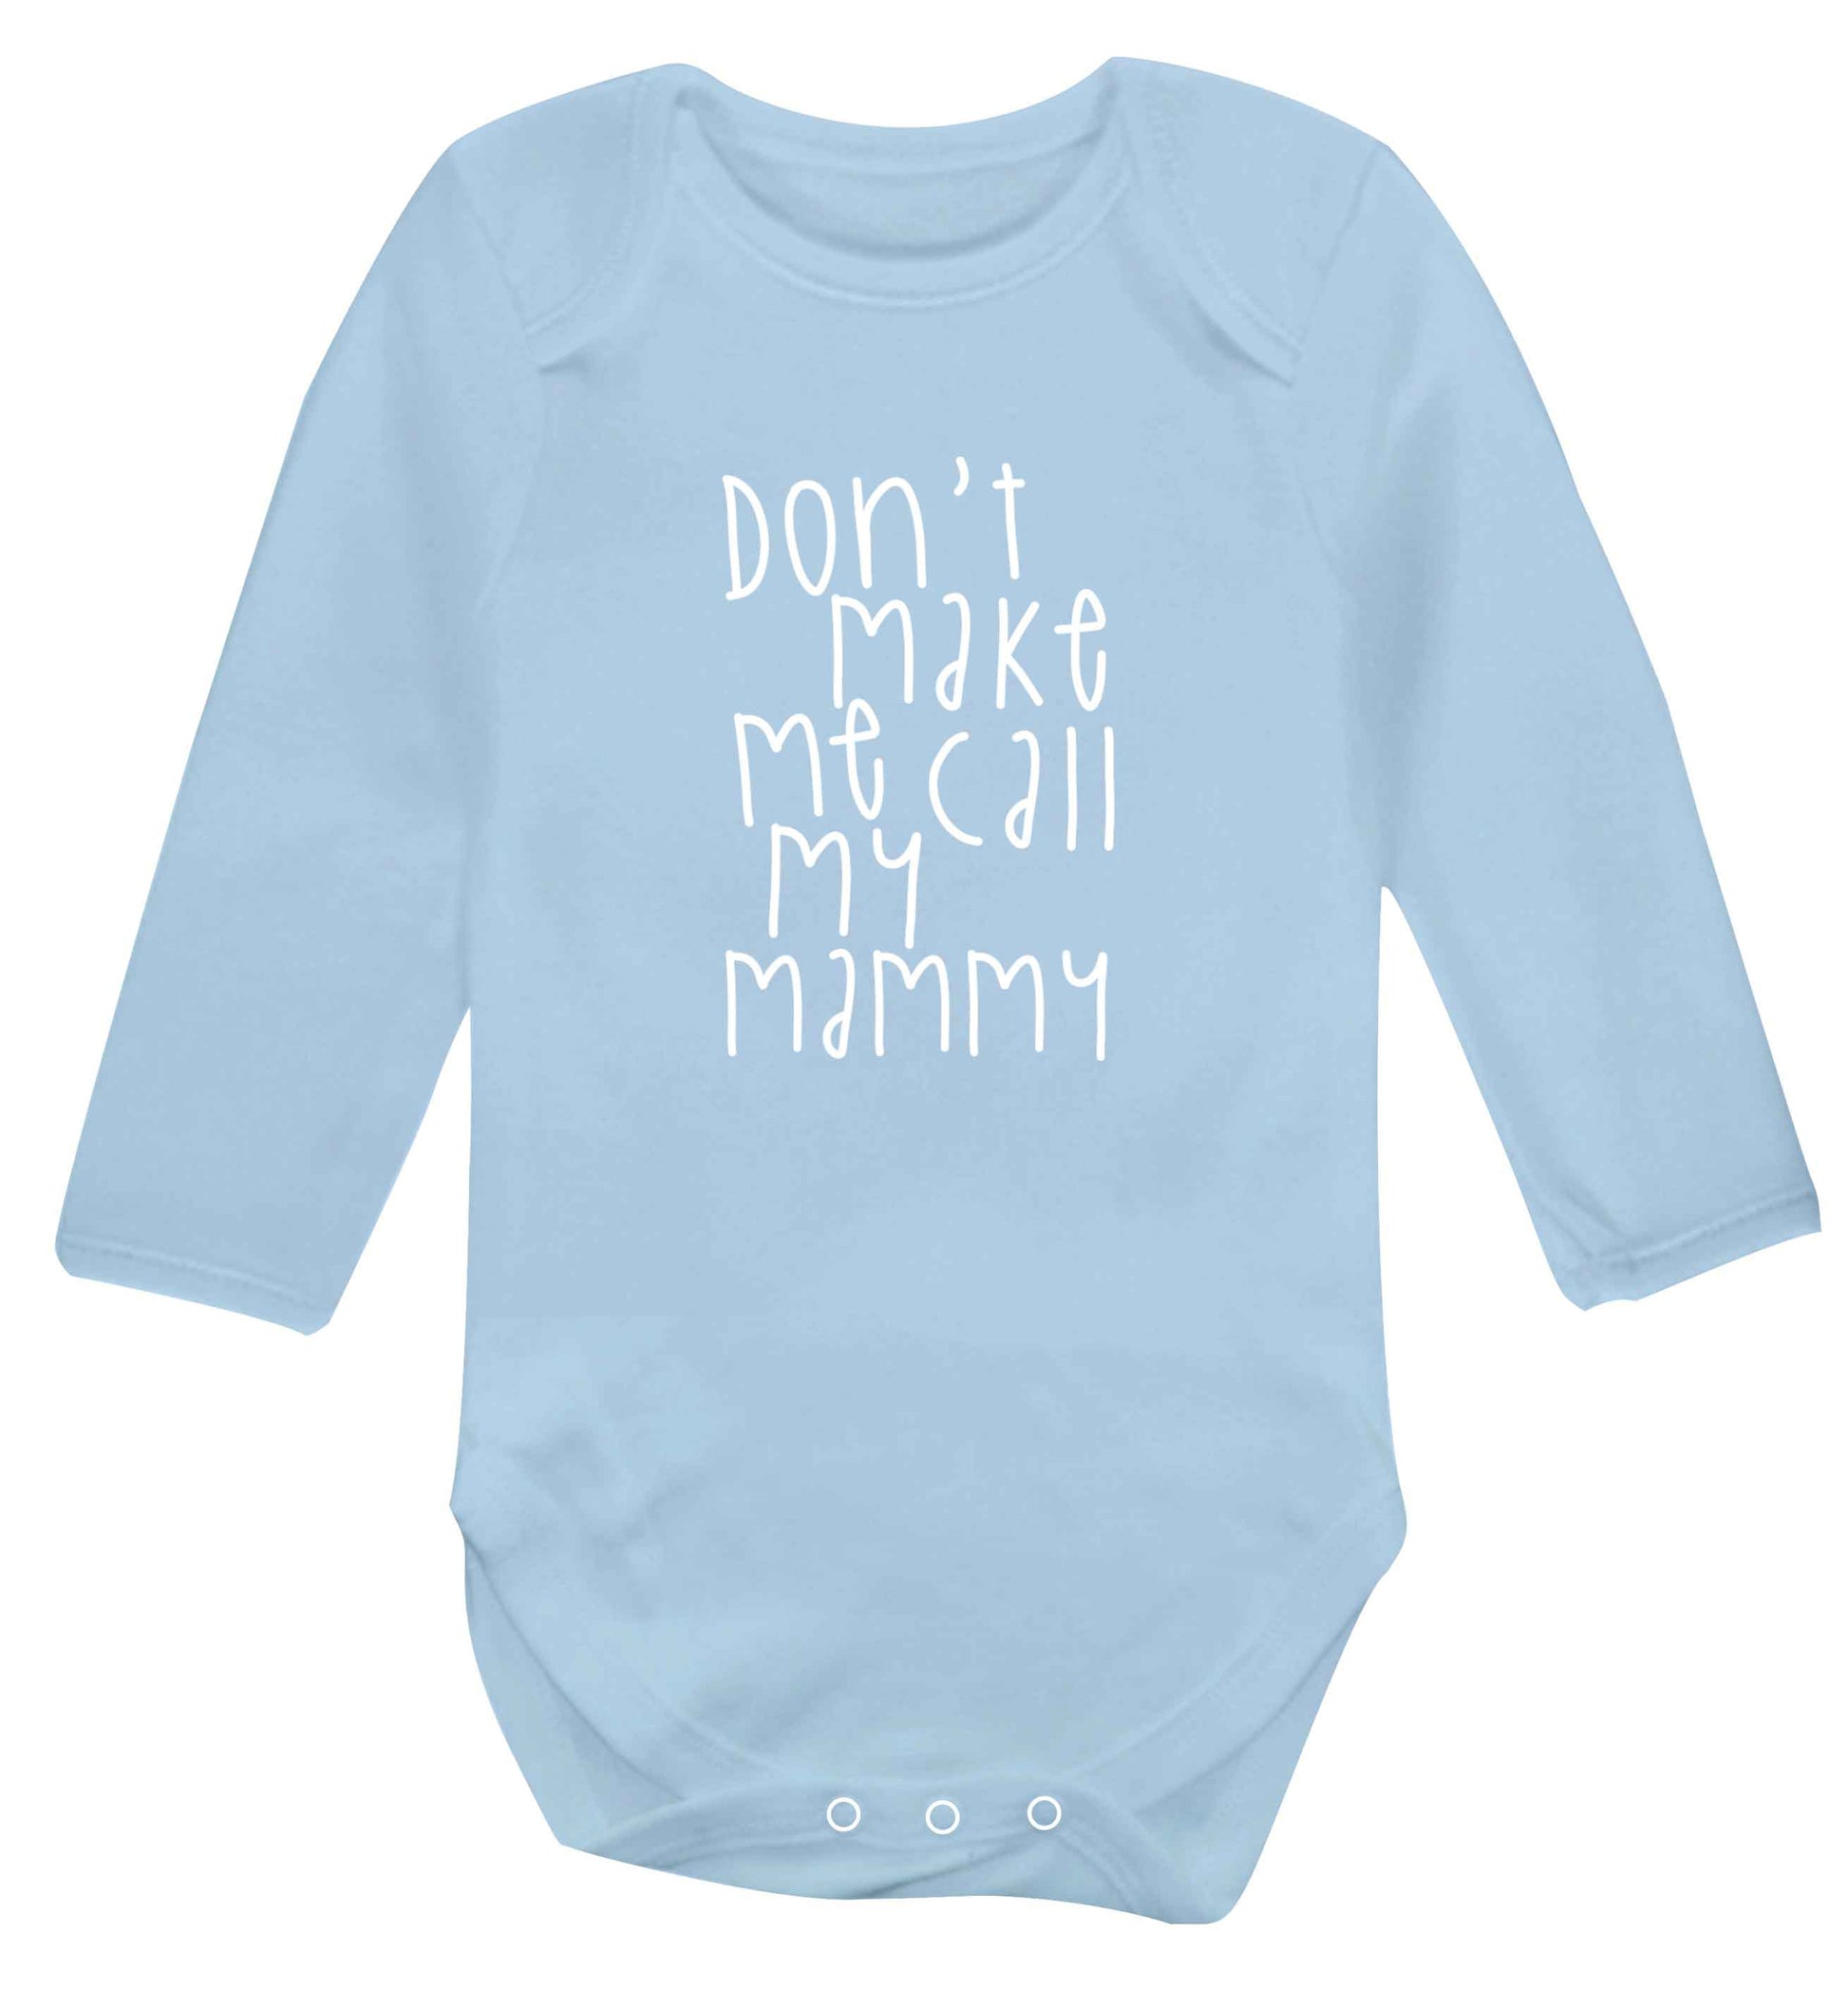 Don't make me call my mammy baby vest long sleeved pale blue 6-12 months